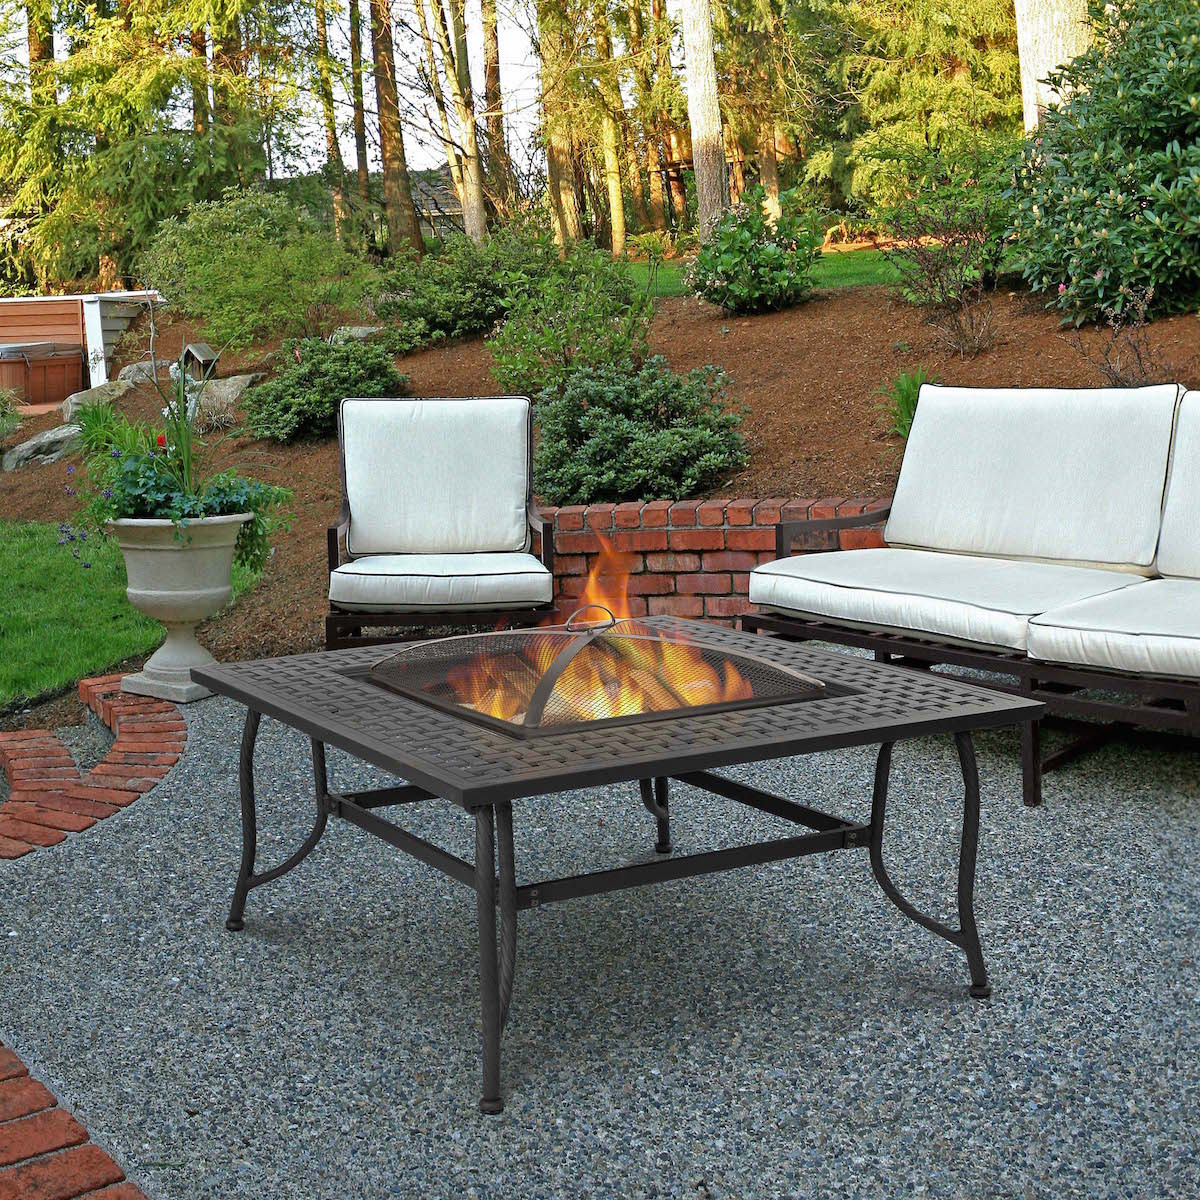 Outdoor Firepit Table
 Real Flame Chelsea Wood Burning Outdoor Fire Pit Table